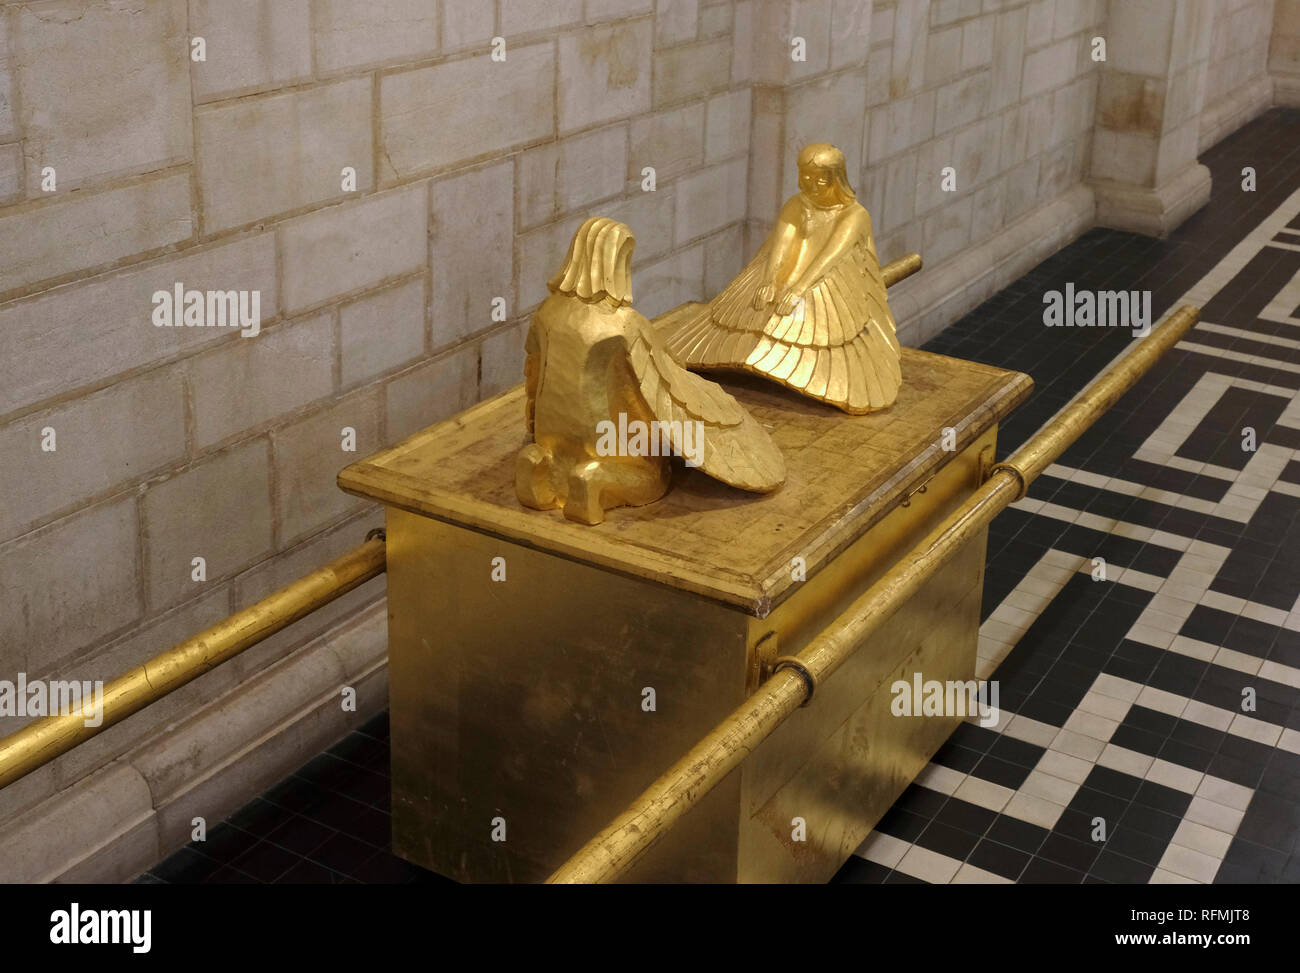 A gilded model of the biblical Ark of the Covenant or Testimony, described in the Book of Exodus as containing the Tablets of Stone on which the Ten Commandments were inscribed placed inside the Lutheran Church of The Ascension Also known as Augusta Victoria located in the Palestinian village of A-Tur on Mount of Olives in East Jerusalem Israel Stock Photo